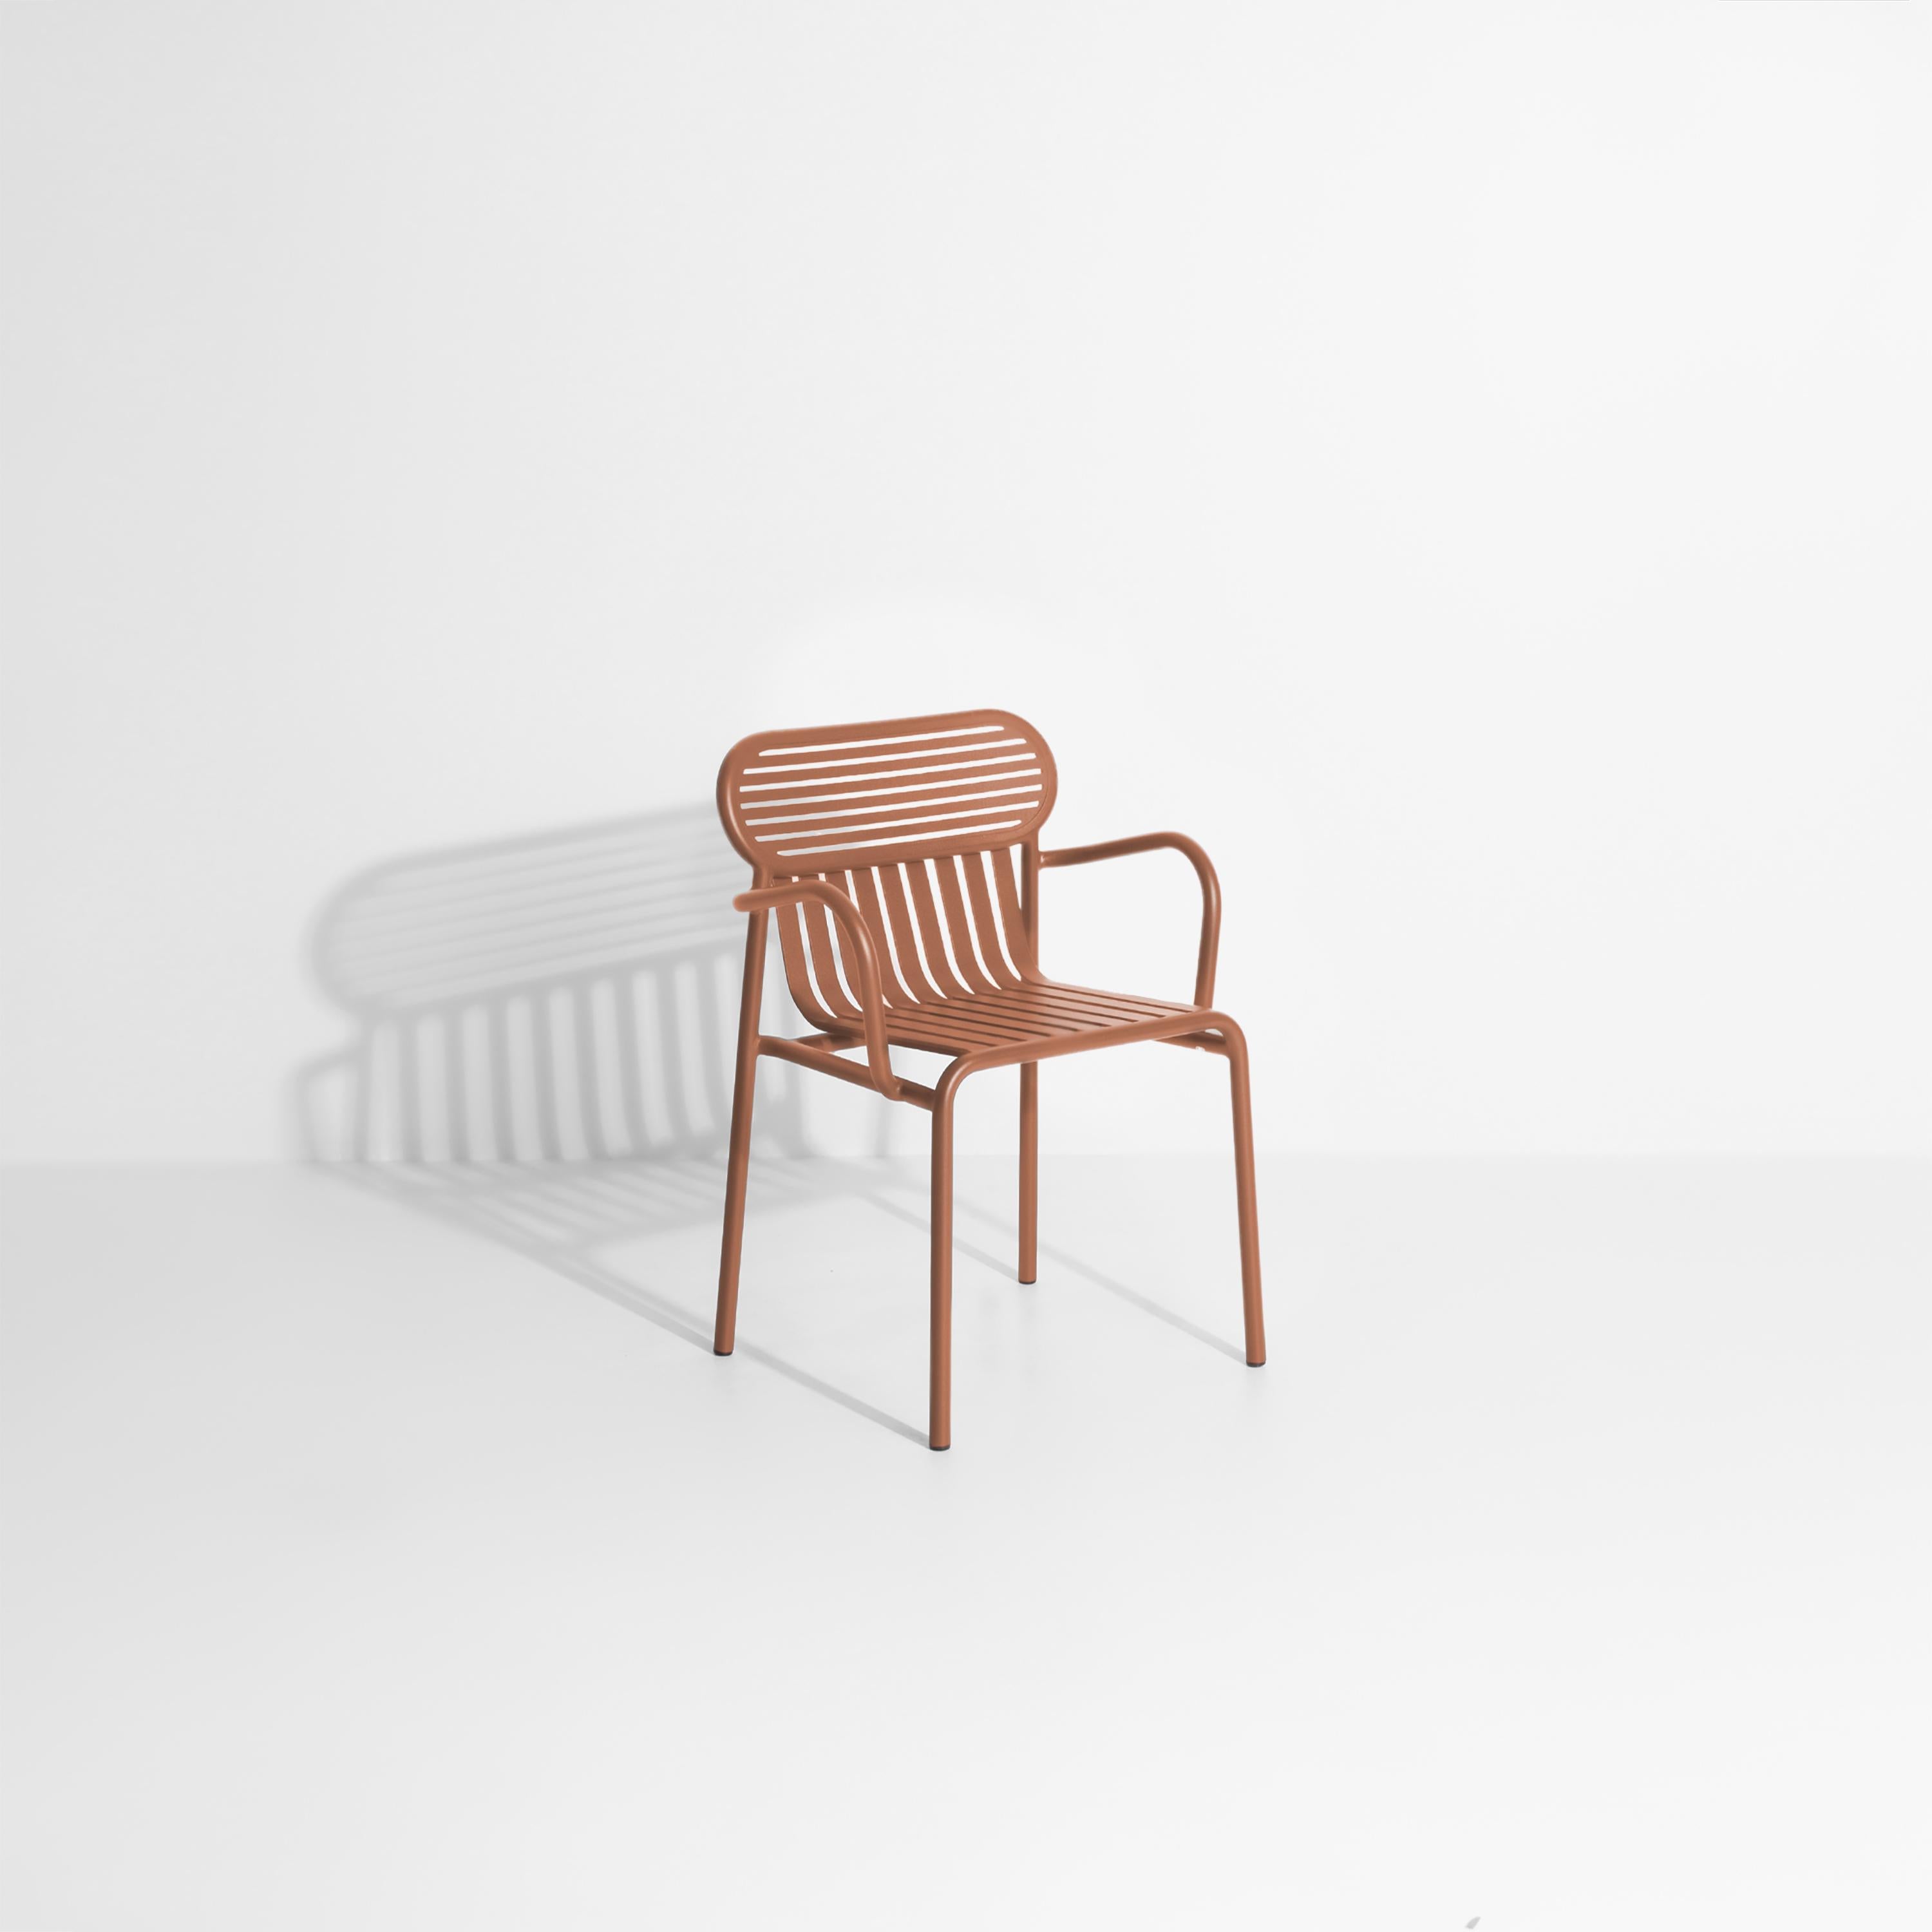 Petite Friture Week-End Bridge Chair in Terracotta Aluminium by Studio BrichetZiegler, 2017

The week-end collection is a full range of outdoor furniture, in aluminium grained epoxy paint, matt finish, that includes 18 functions and 8 colours for